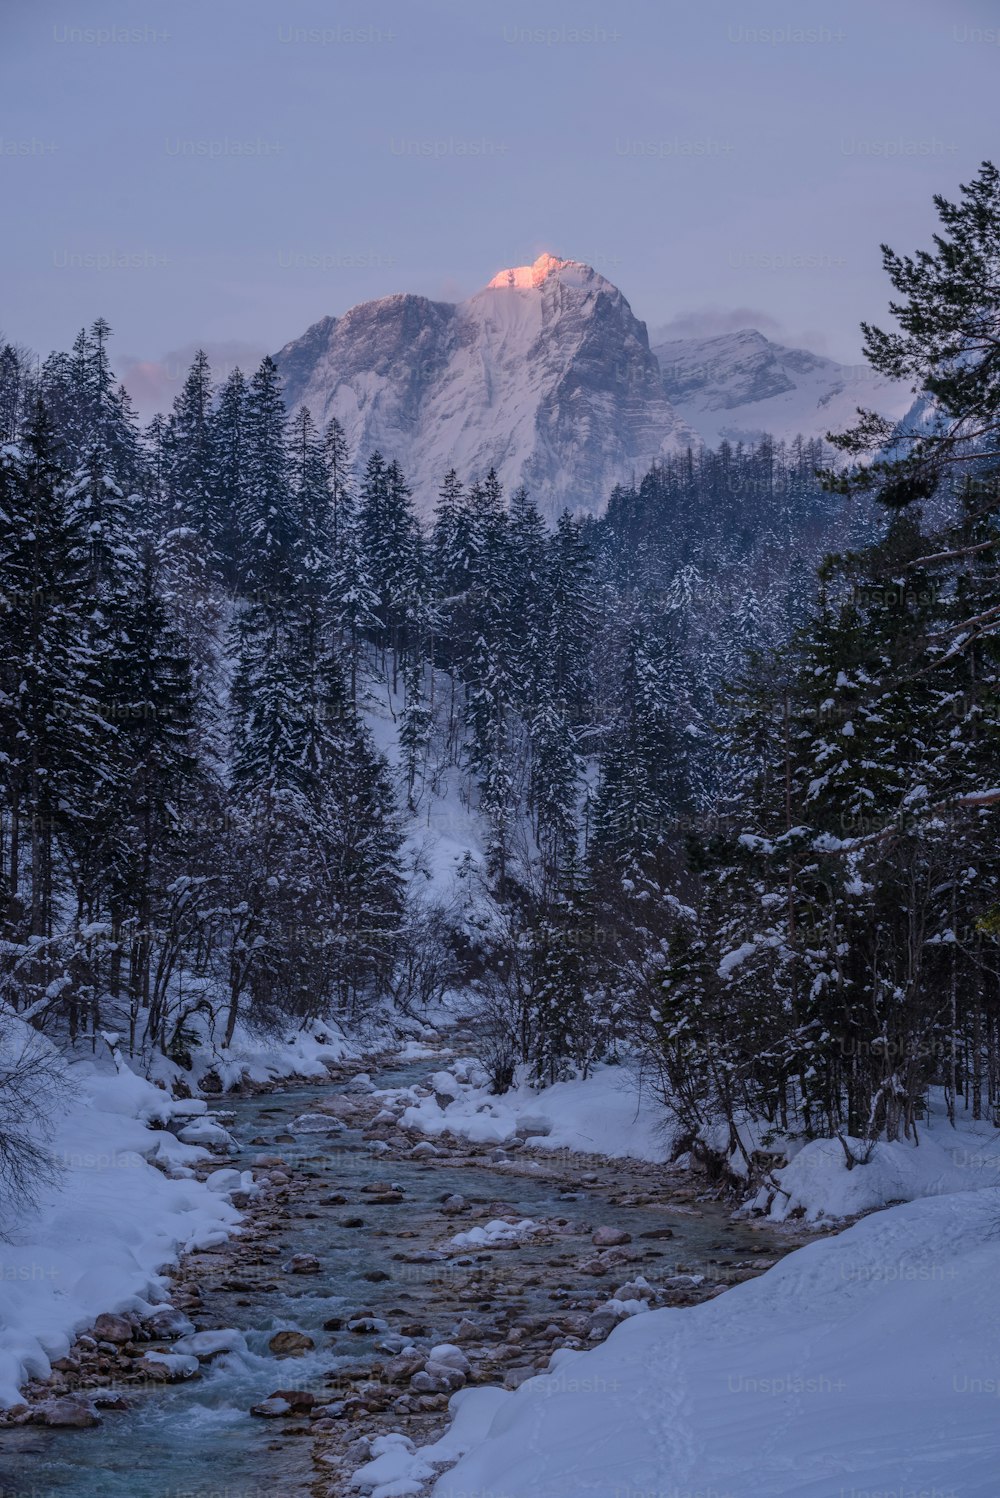 a snowy mountain with trees and a fire in the distance